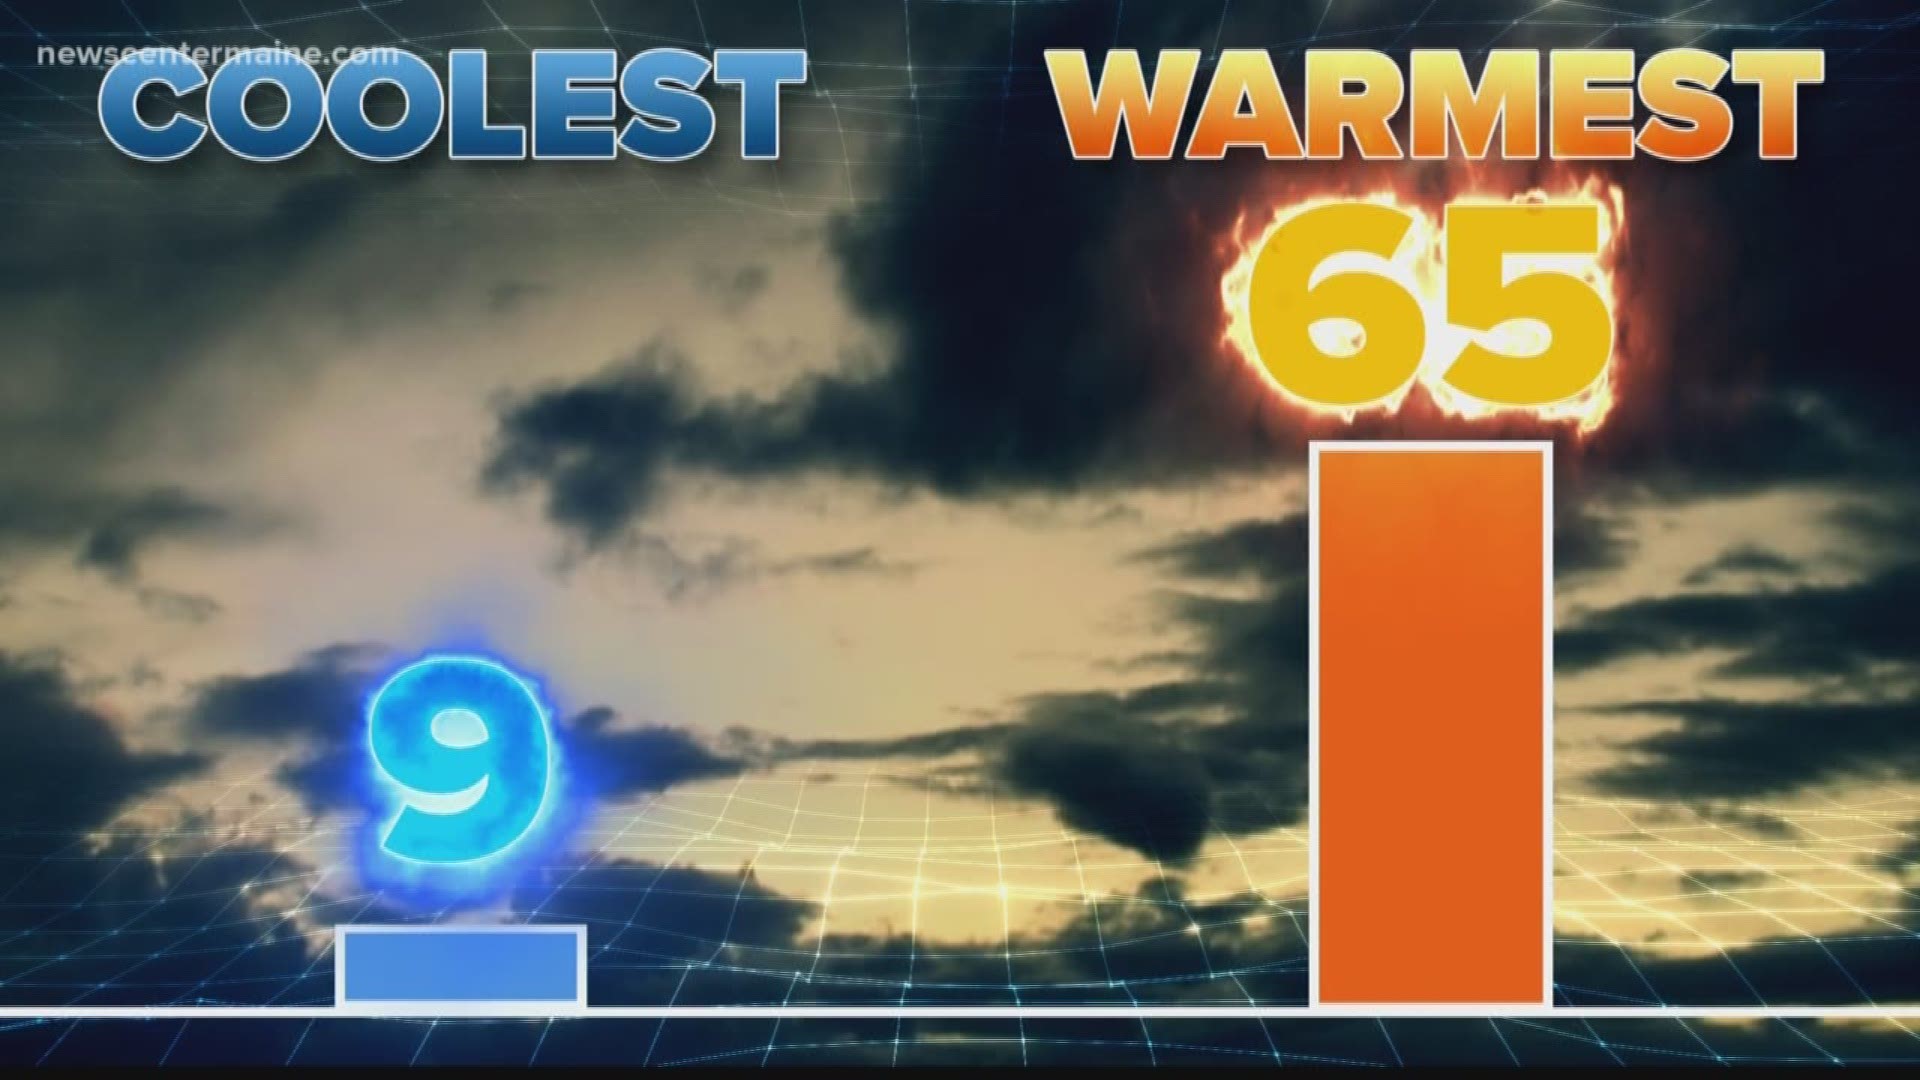 BrainDrops: In the past 20 years, Maine has seen 9 of its coolest months and 65 of its warmest months.